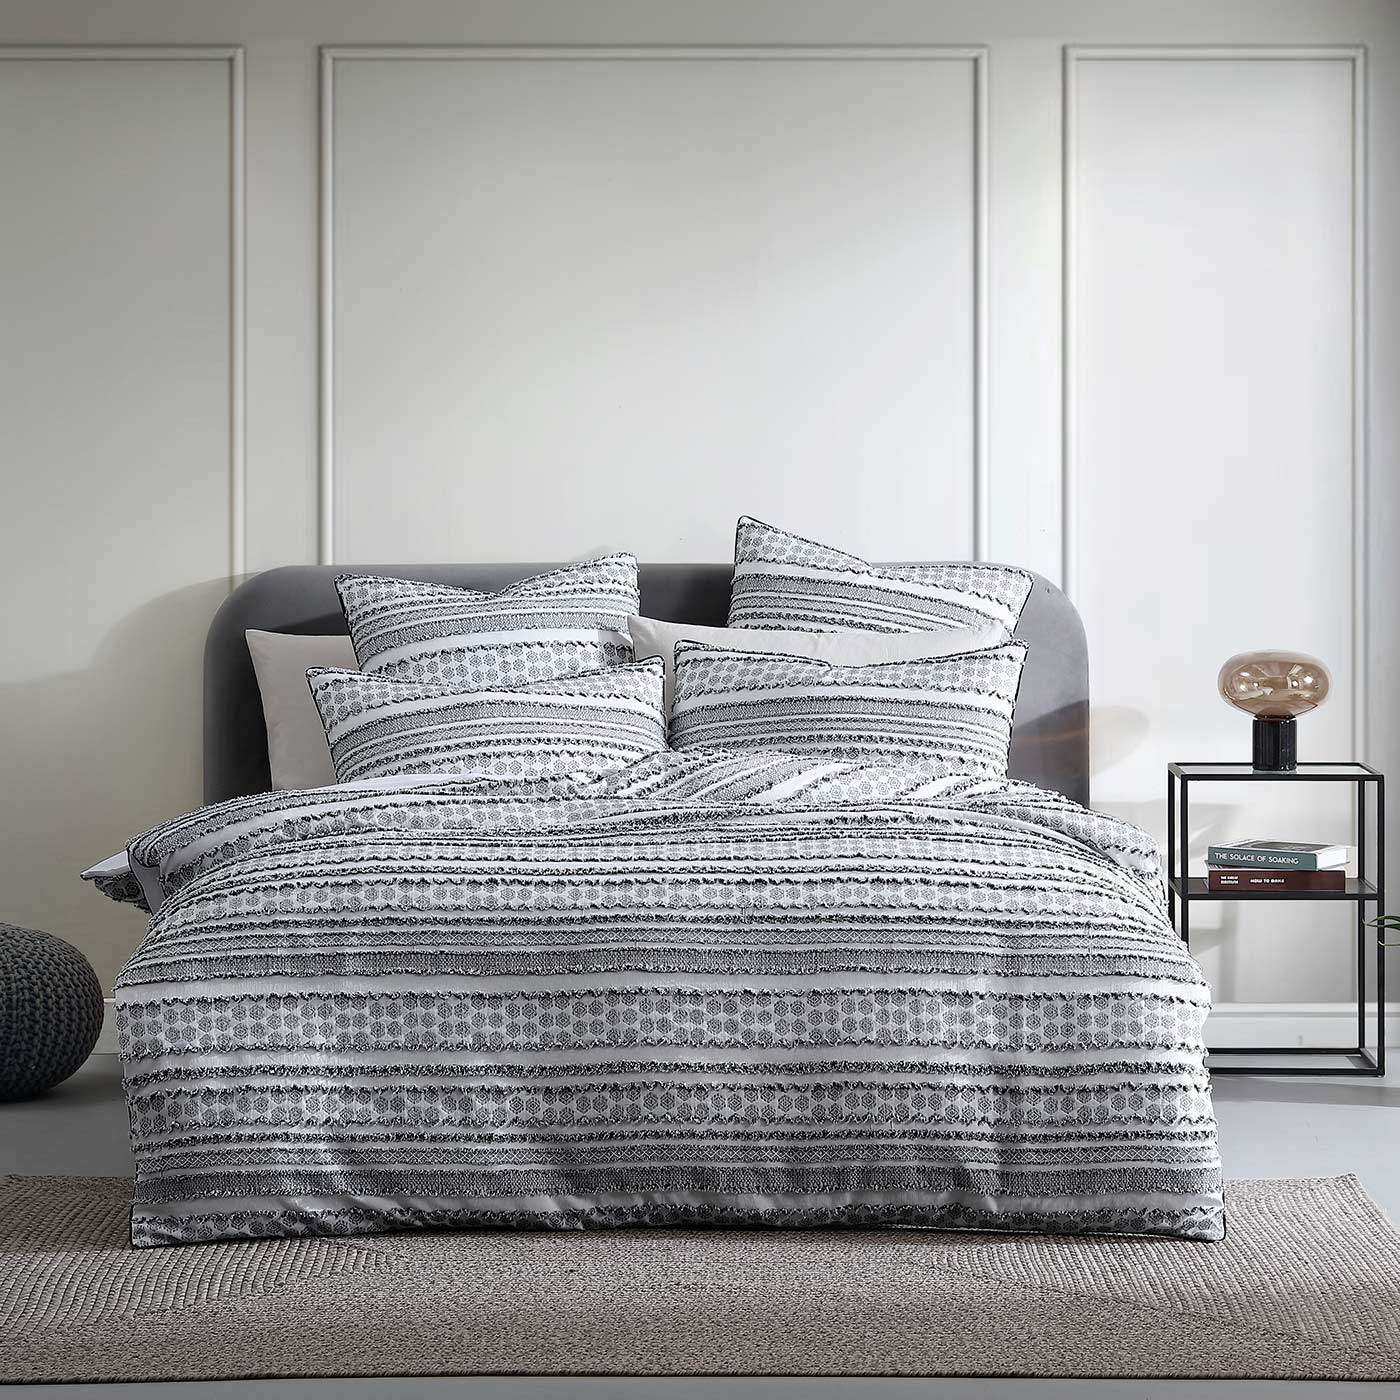 Zanda Smoke is an attention grabbing, high energy design for the modern bedroom.